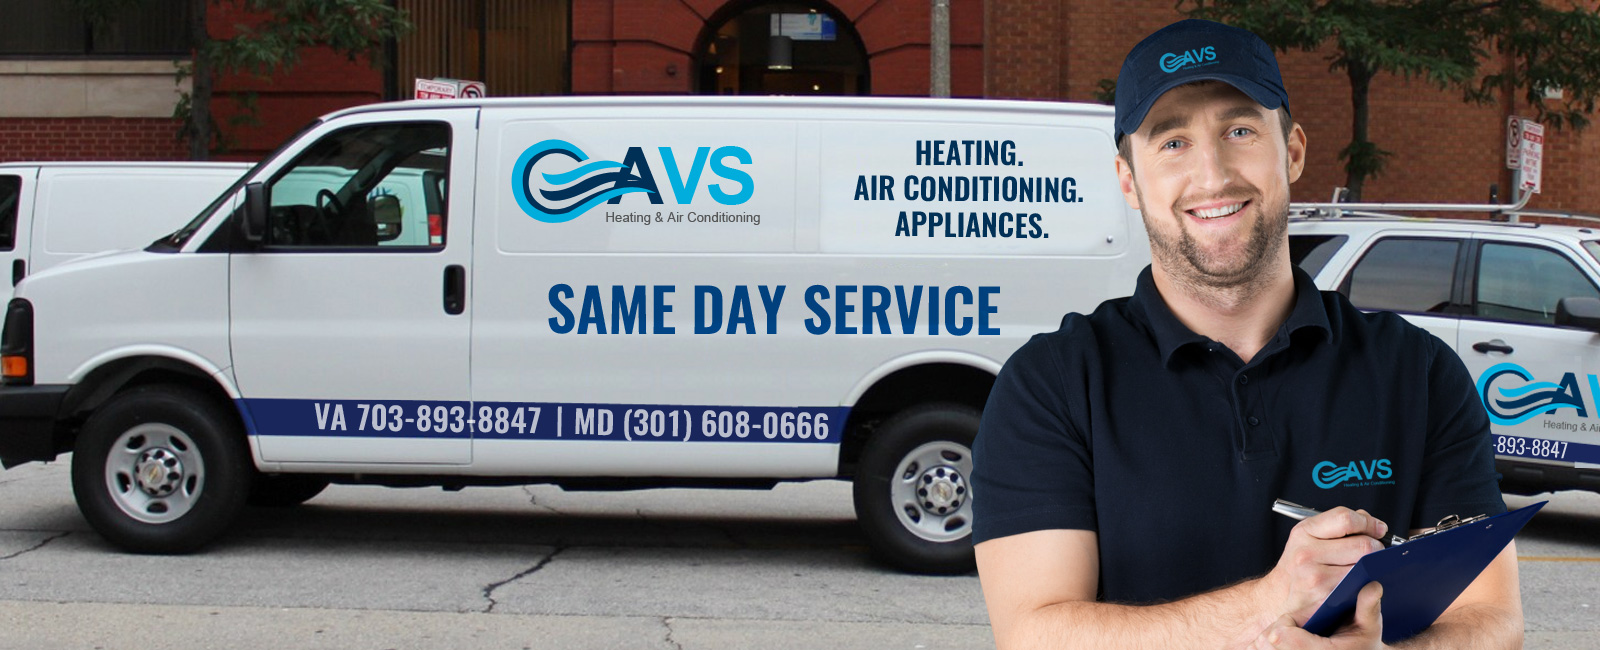 Alexandria HVAC Contractor | Heating System, Boiler, Heat Pump, Fireplace and AC Installation & Repair services